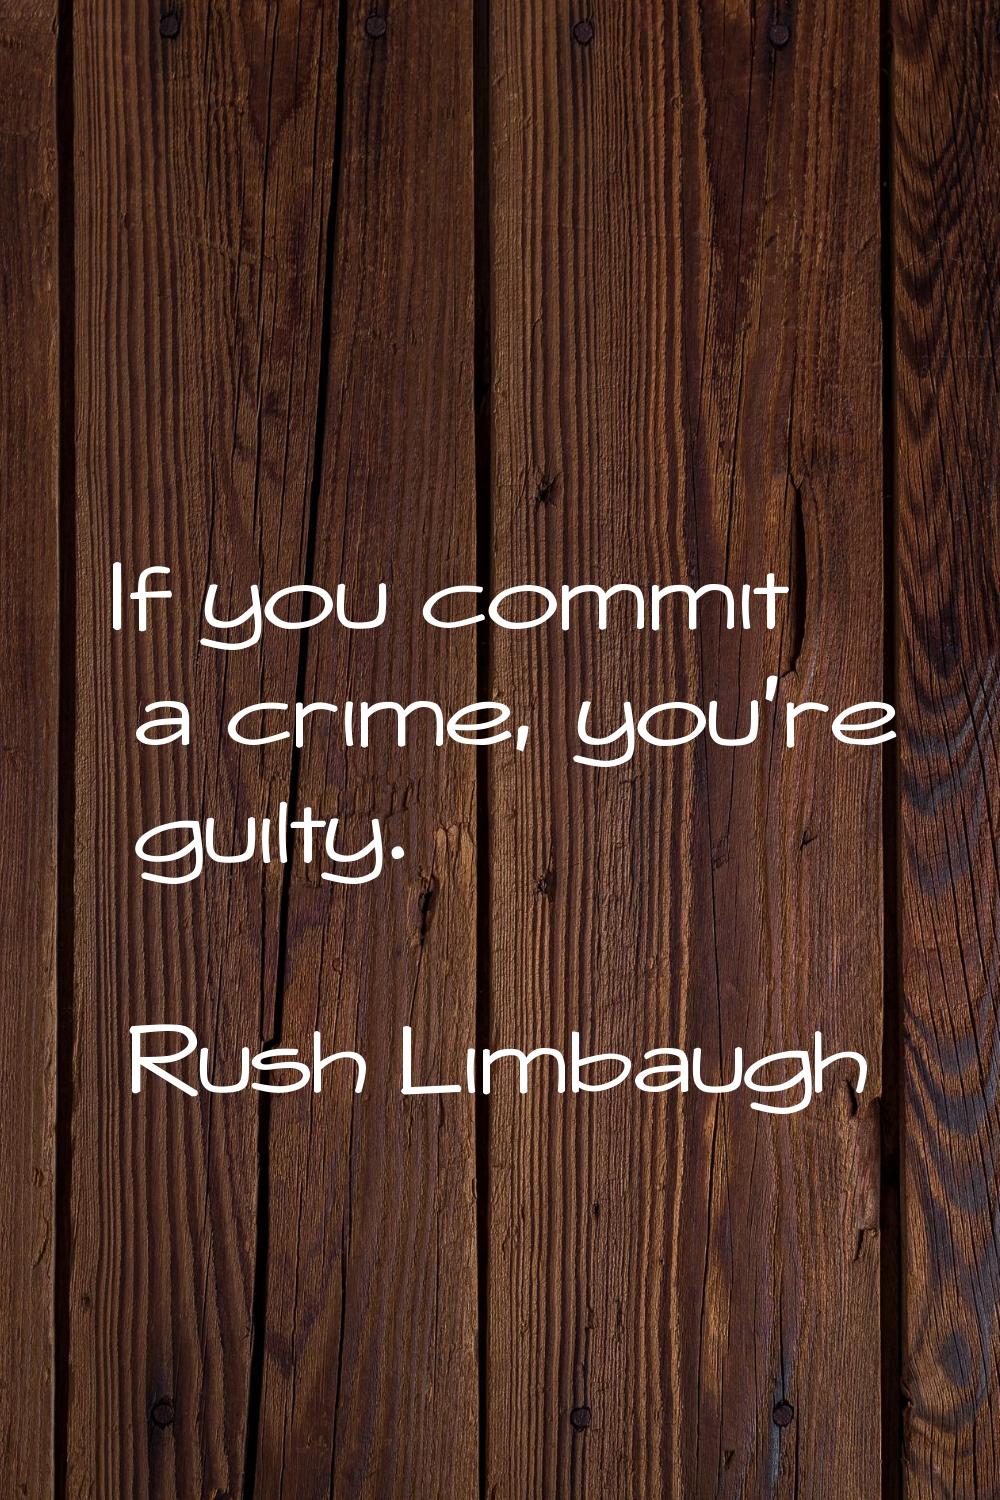 If you commit a crime, you're guilty.